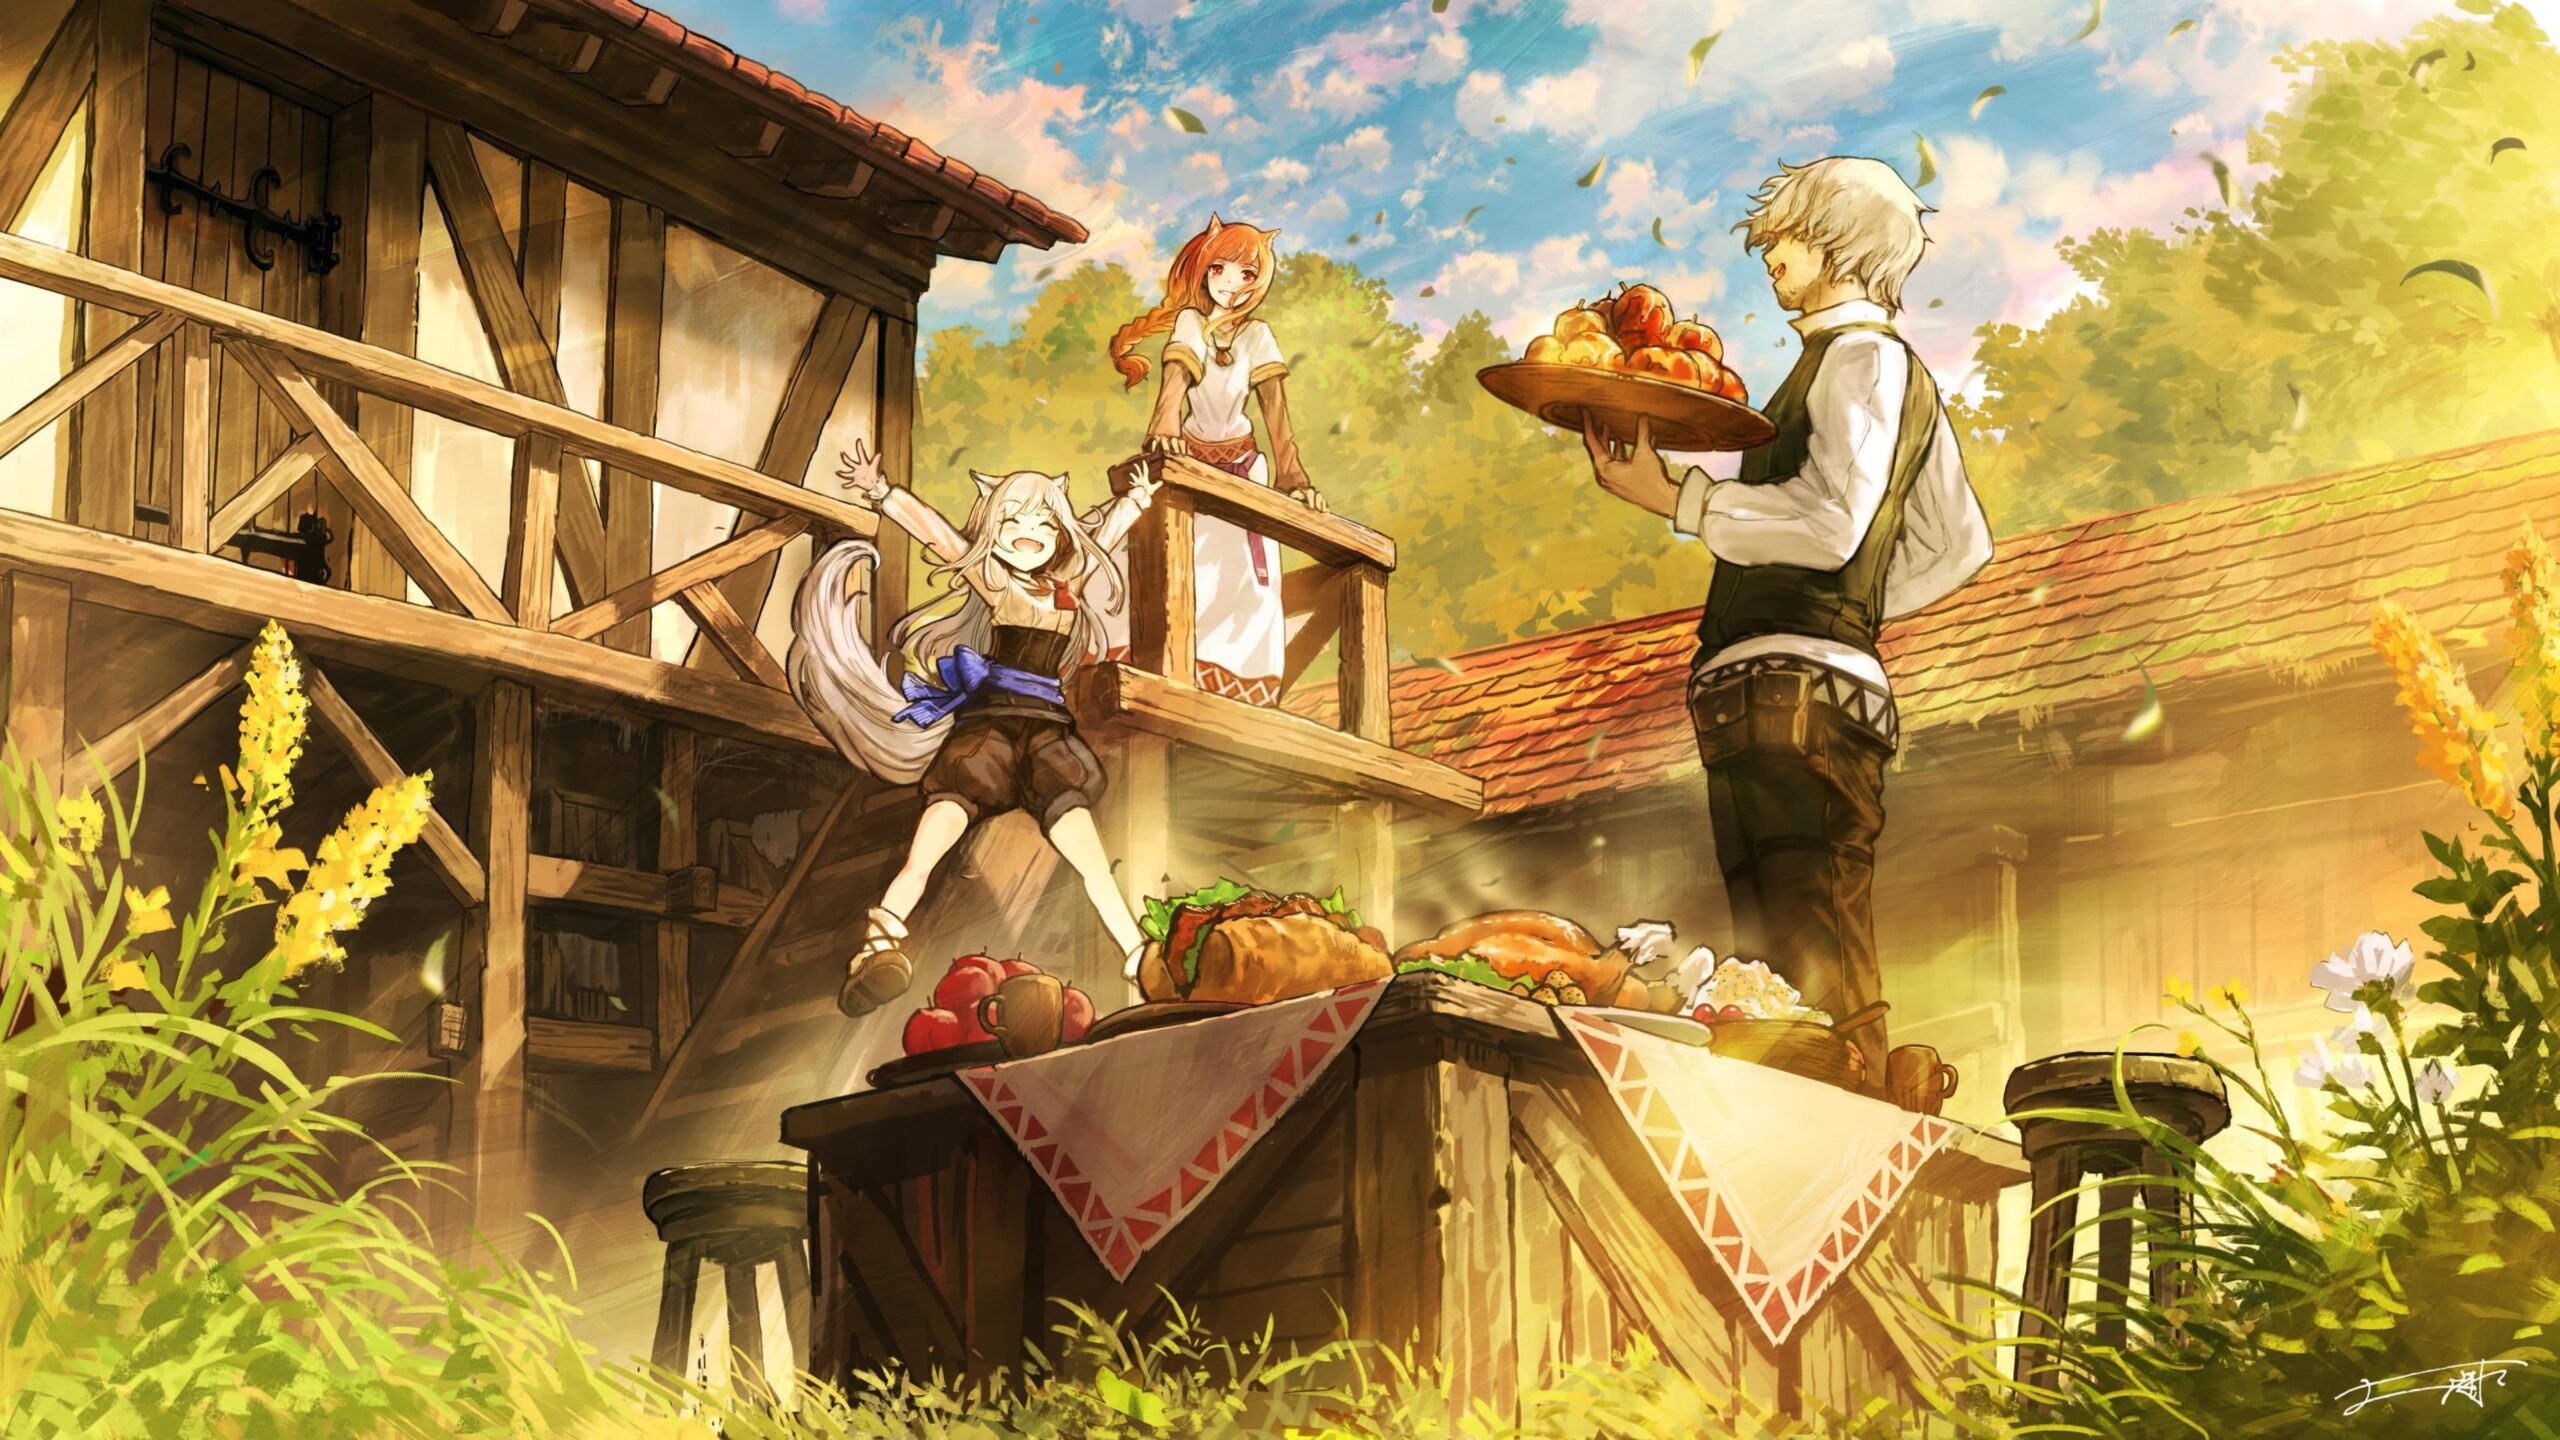 Spice and Wolf (Anime): The plot focusing on economics, trade, and peddling. 2560x1440 HD Wallpaper.